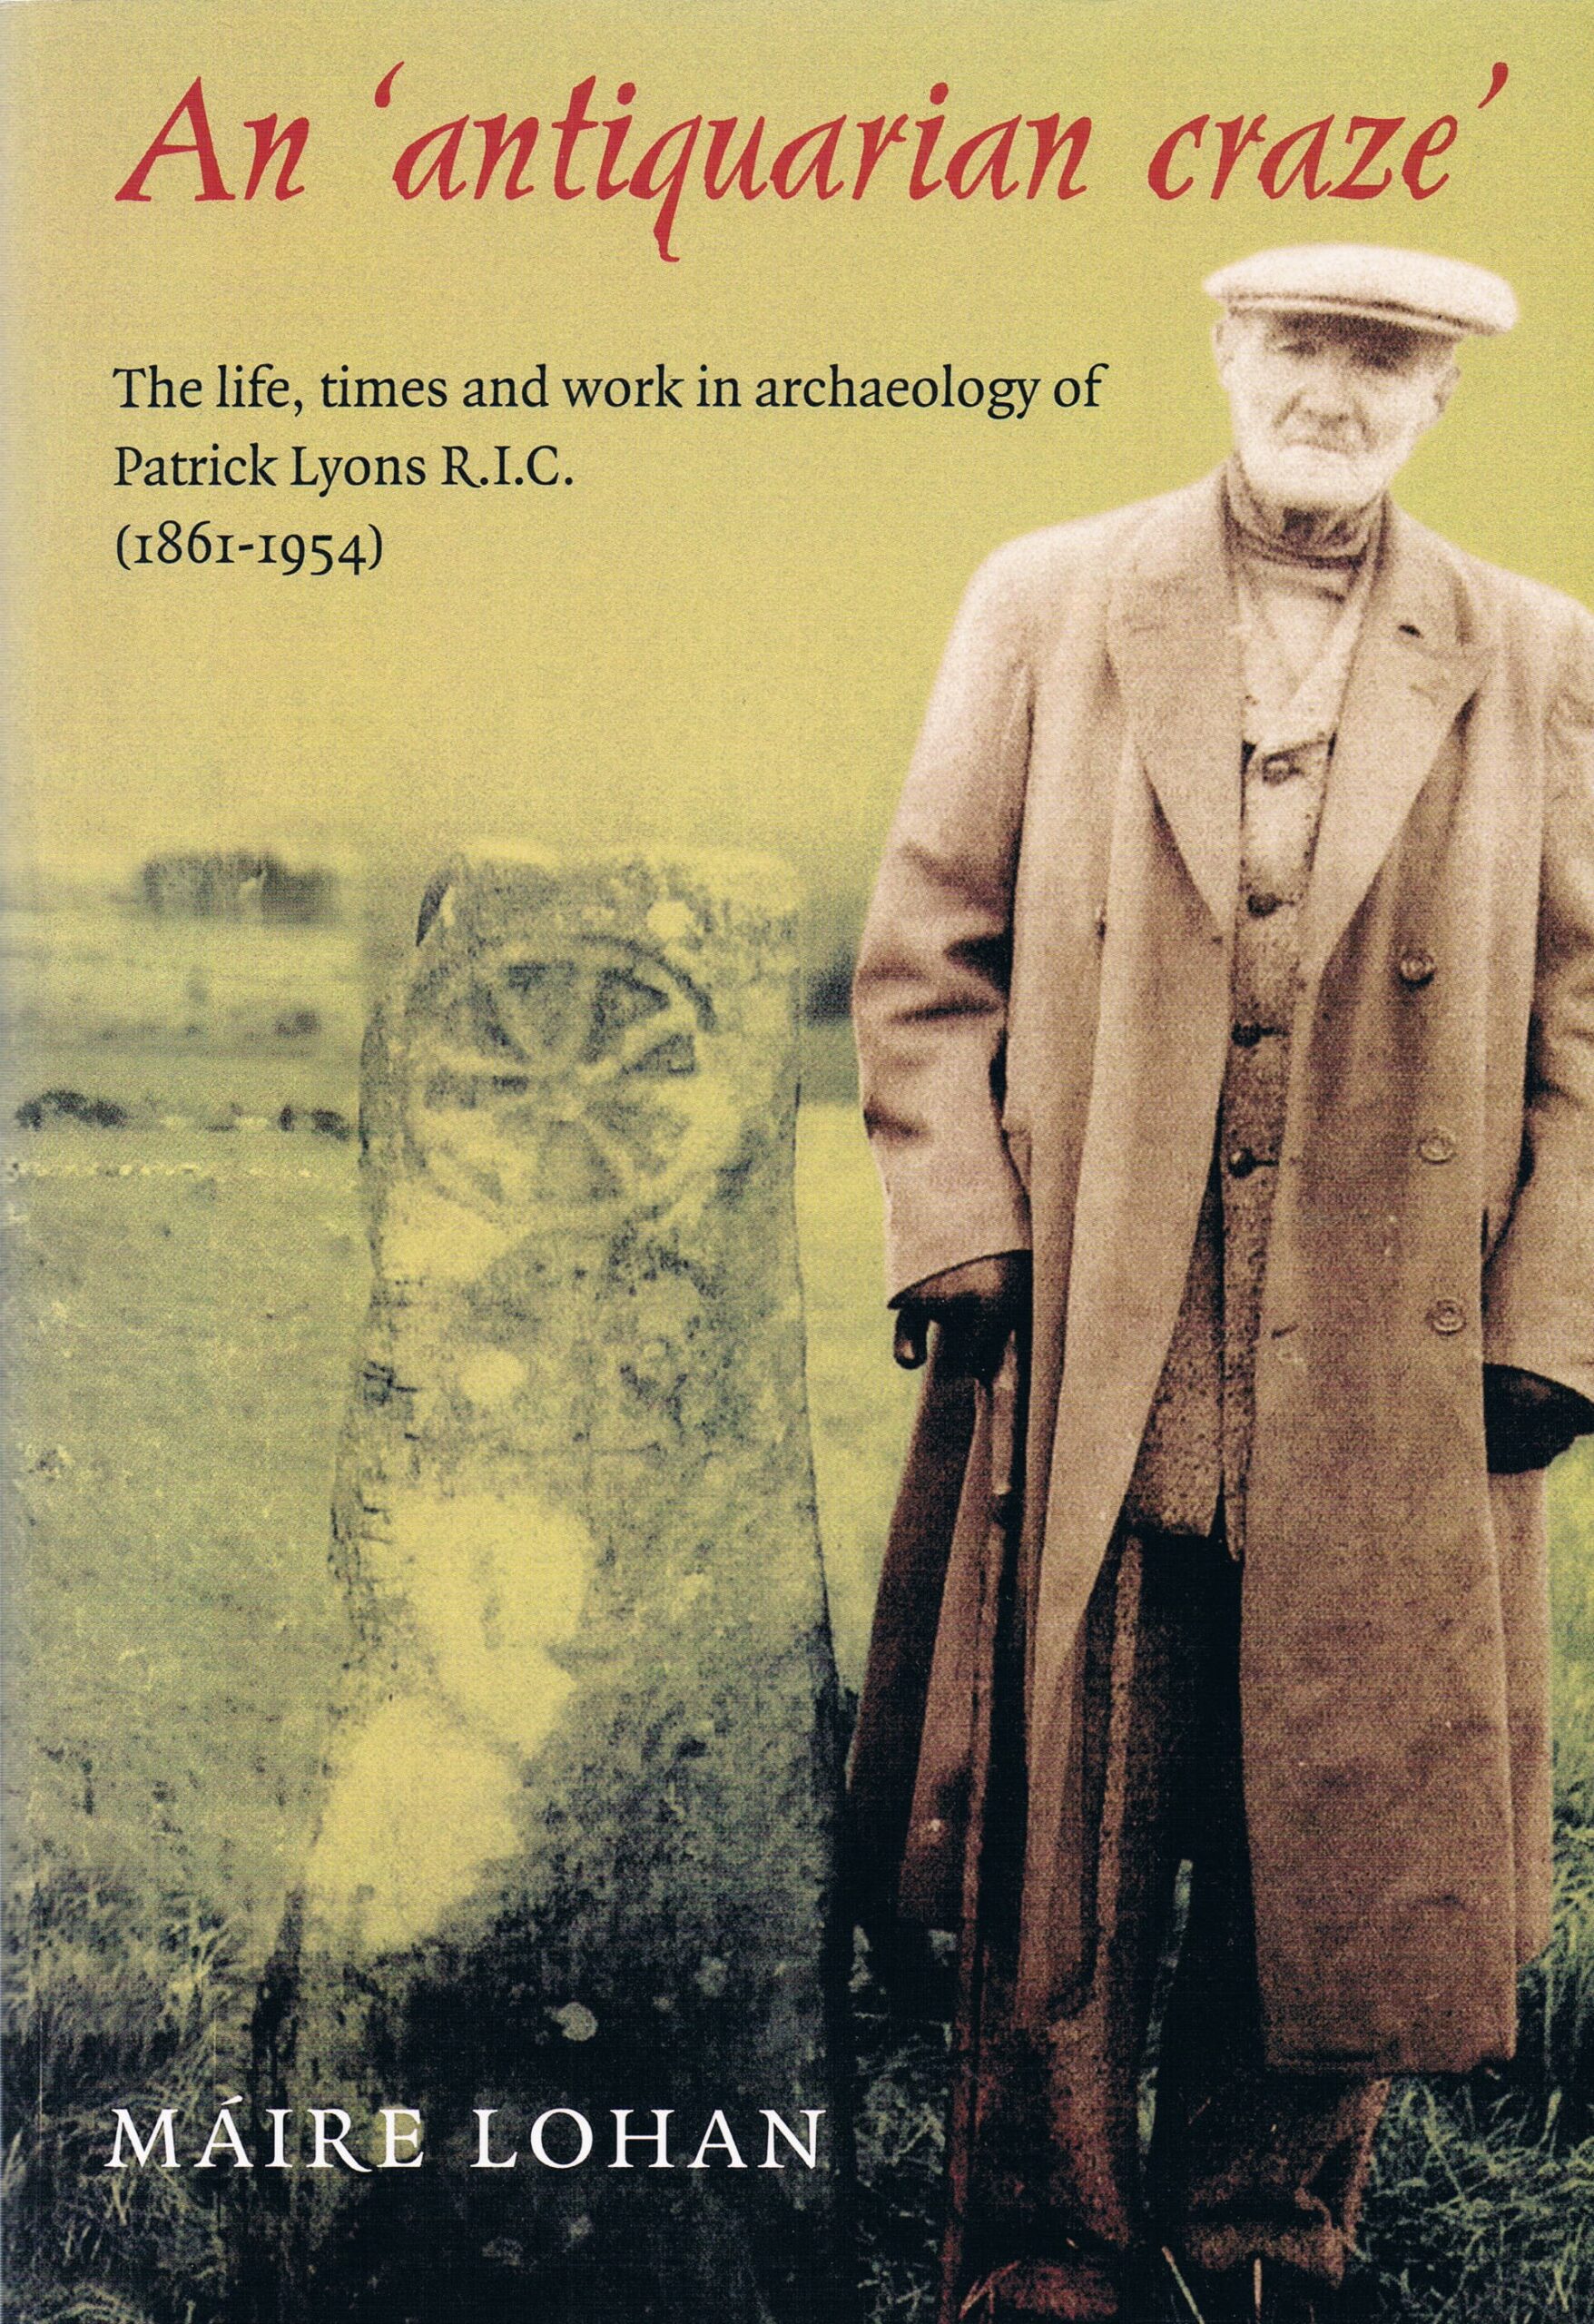 An ‘Antiquarian Craze’ The Life, Times and Work in Archaeology of Patrick Lyons R.I.C. | Máire Lohan | Charlie Byrne's